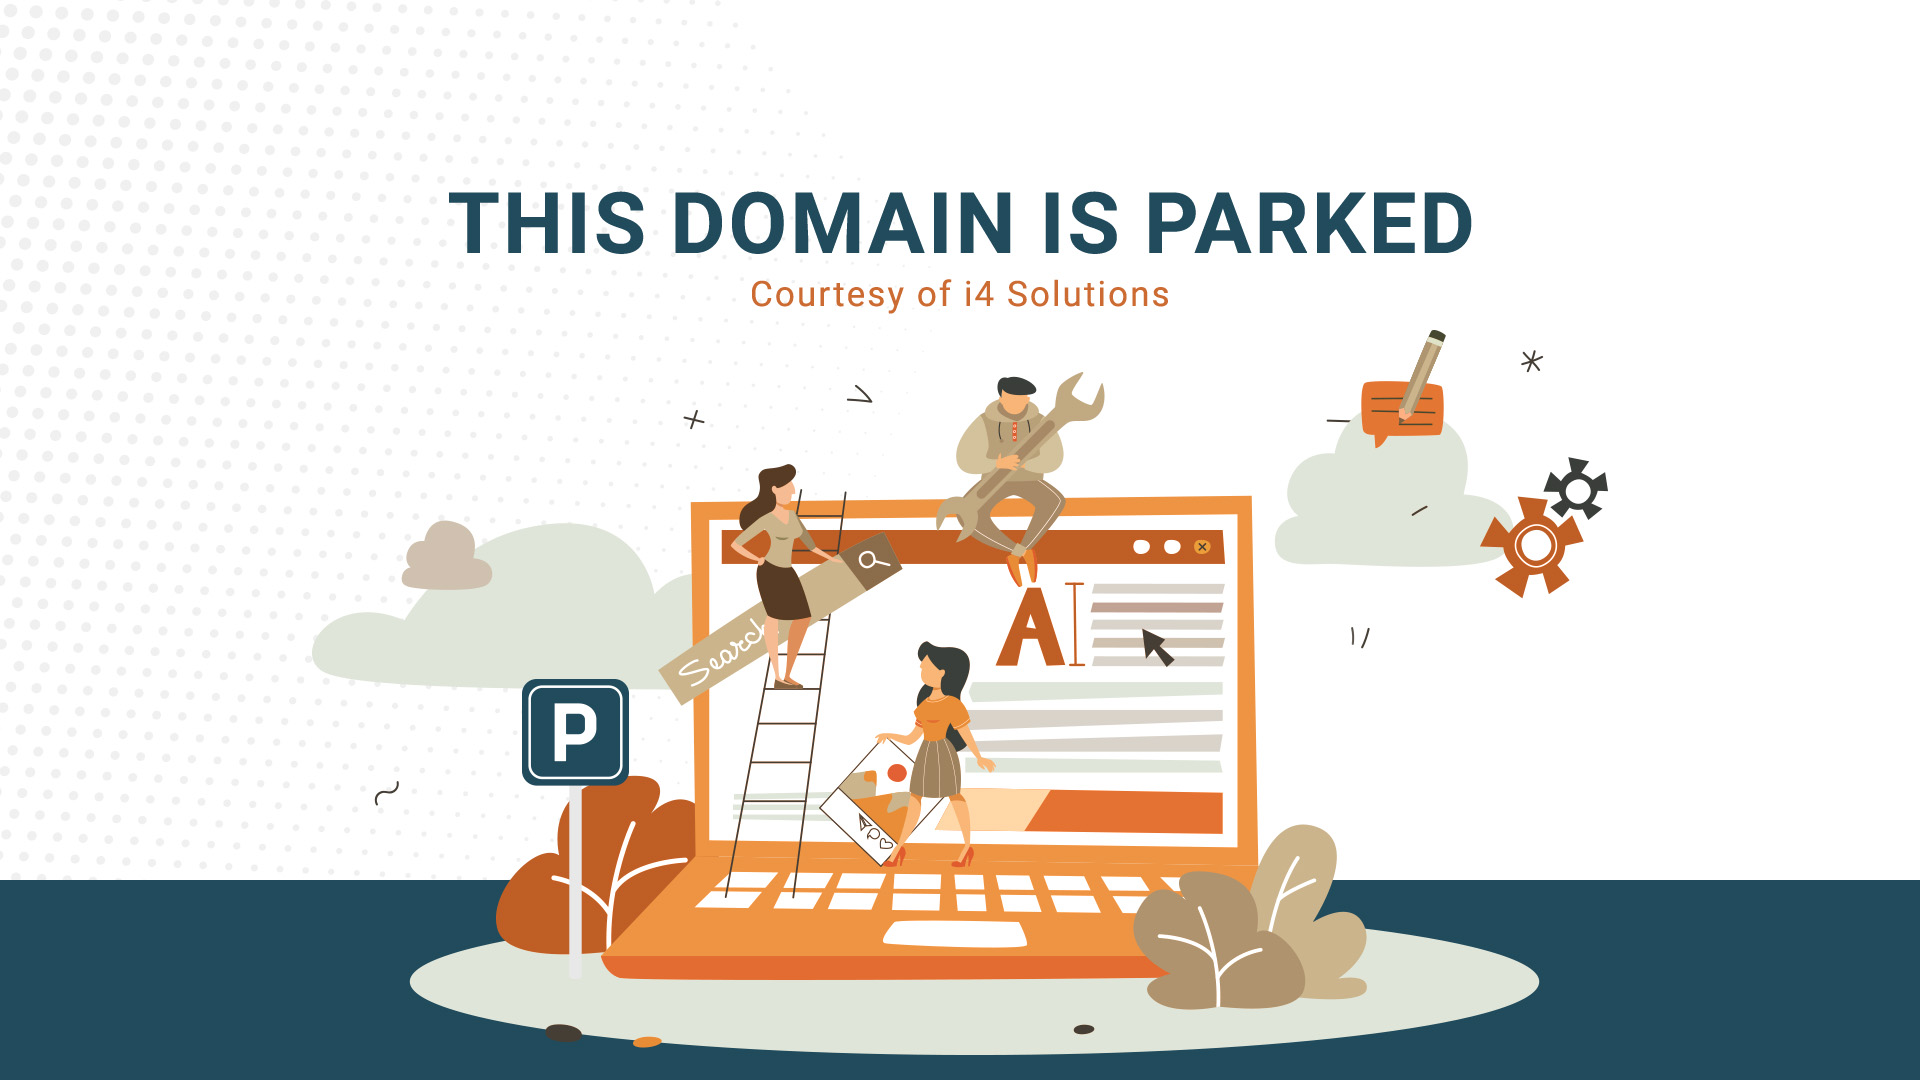 This domain is parked free courtesy of i4 Solutions